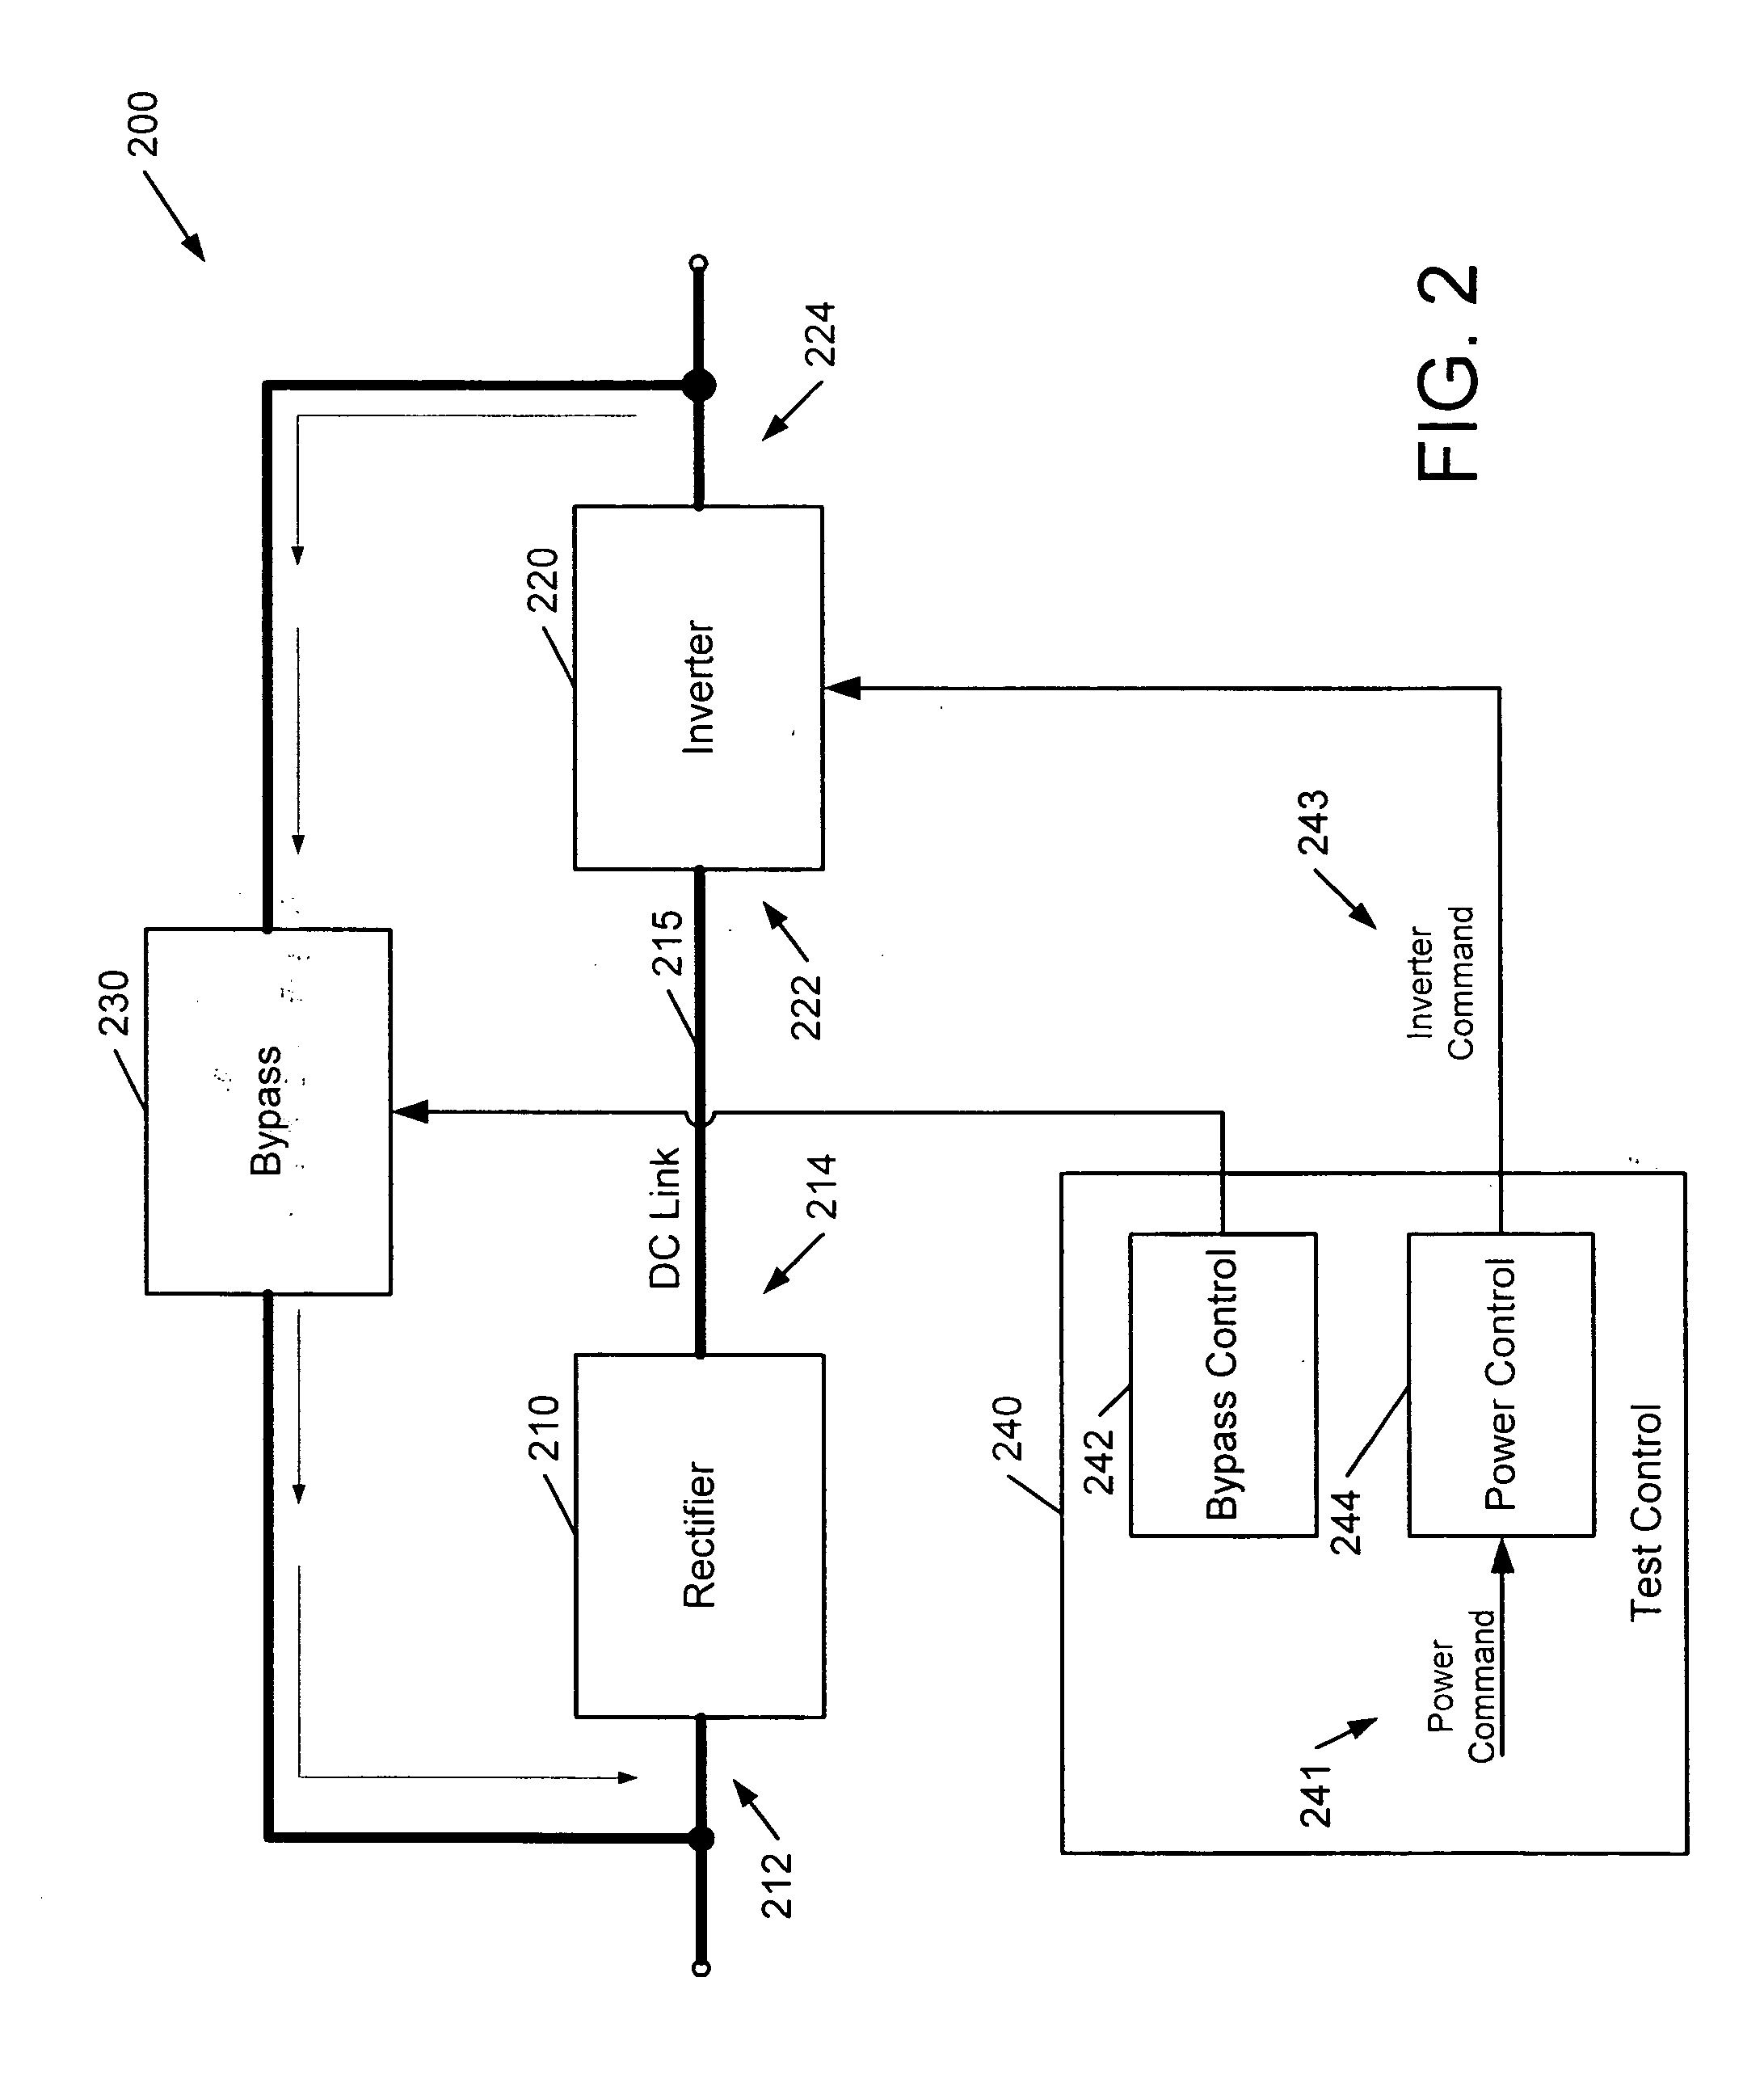 Self-testing power supply apparatus, methods and computer program products